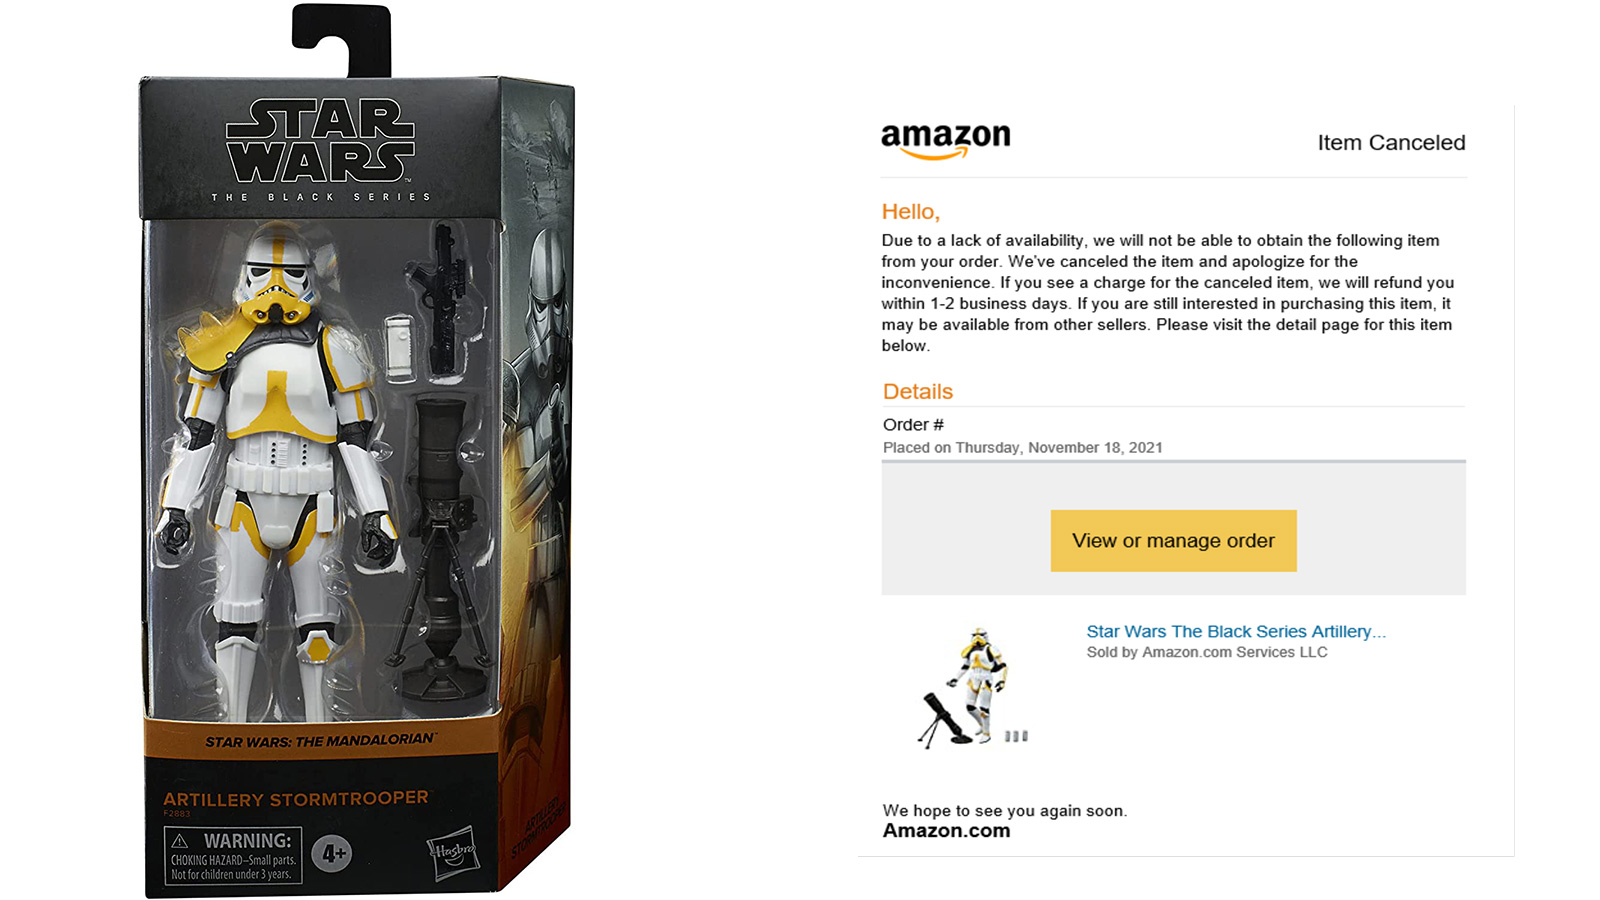 Amazon Sending Out Cancellation Notices For Remaining Preorders Of Their Exclusive TBS 6-Inch Artillery Stormtrooper